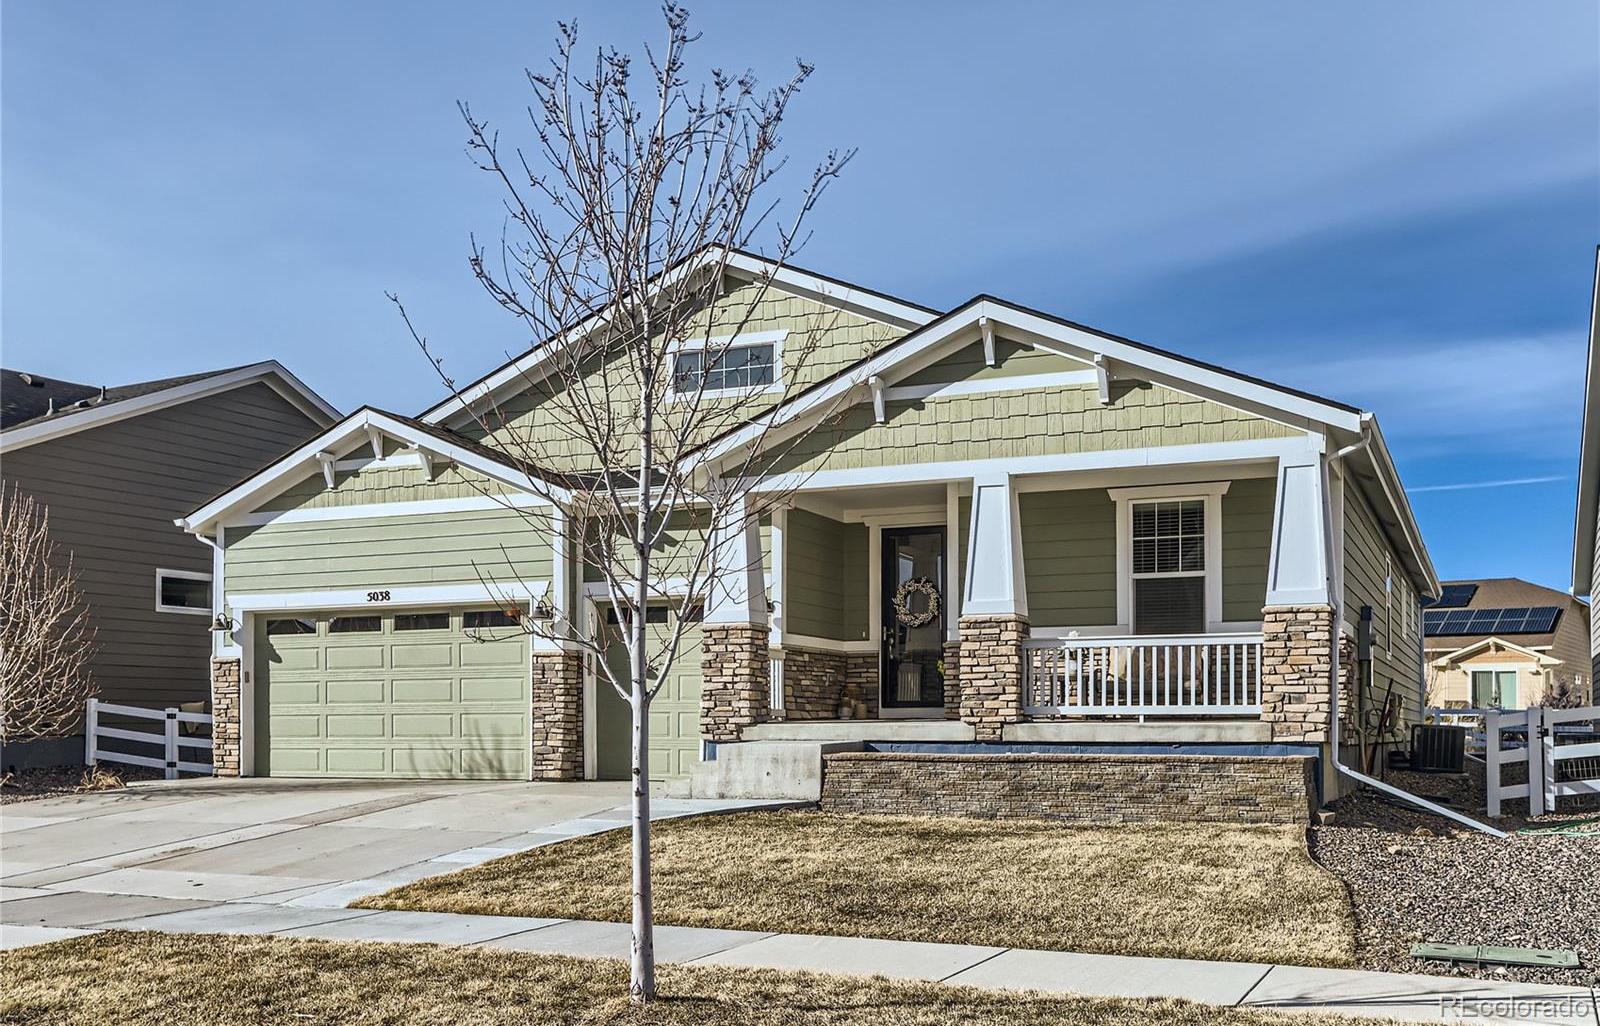 Photo one of 5038 Maxwell Ave Longmont CO 80503 | MLS 3811059